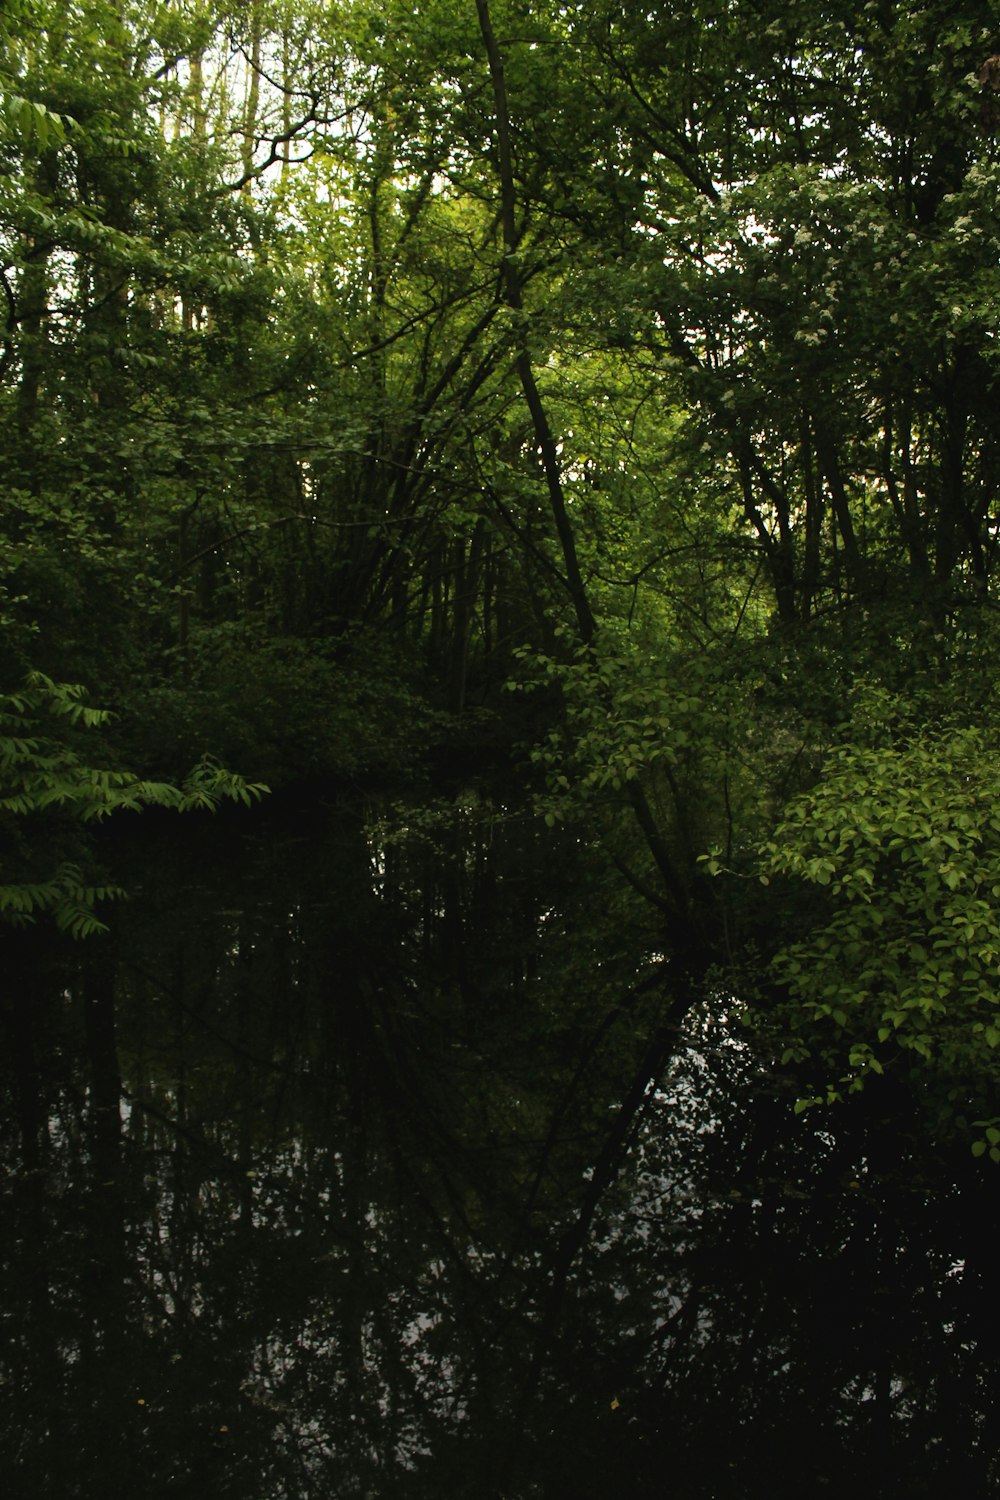 a body of water surrounded by trees and bushes